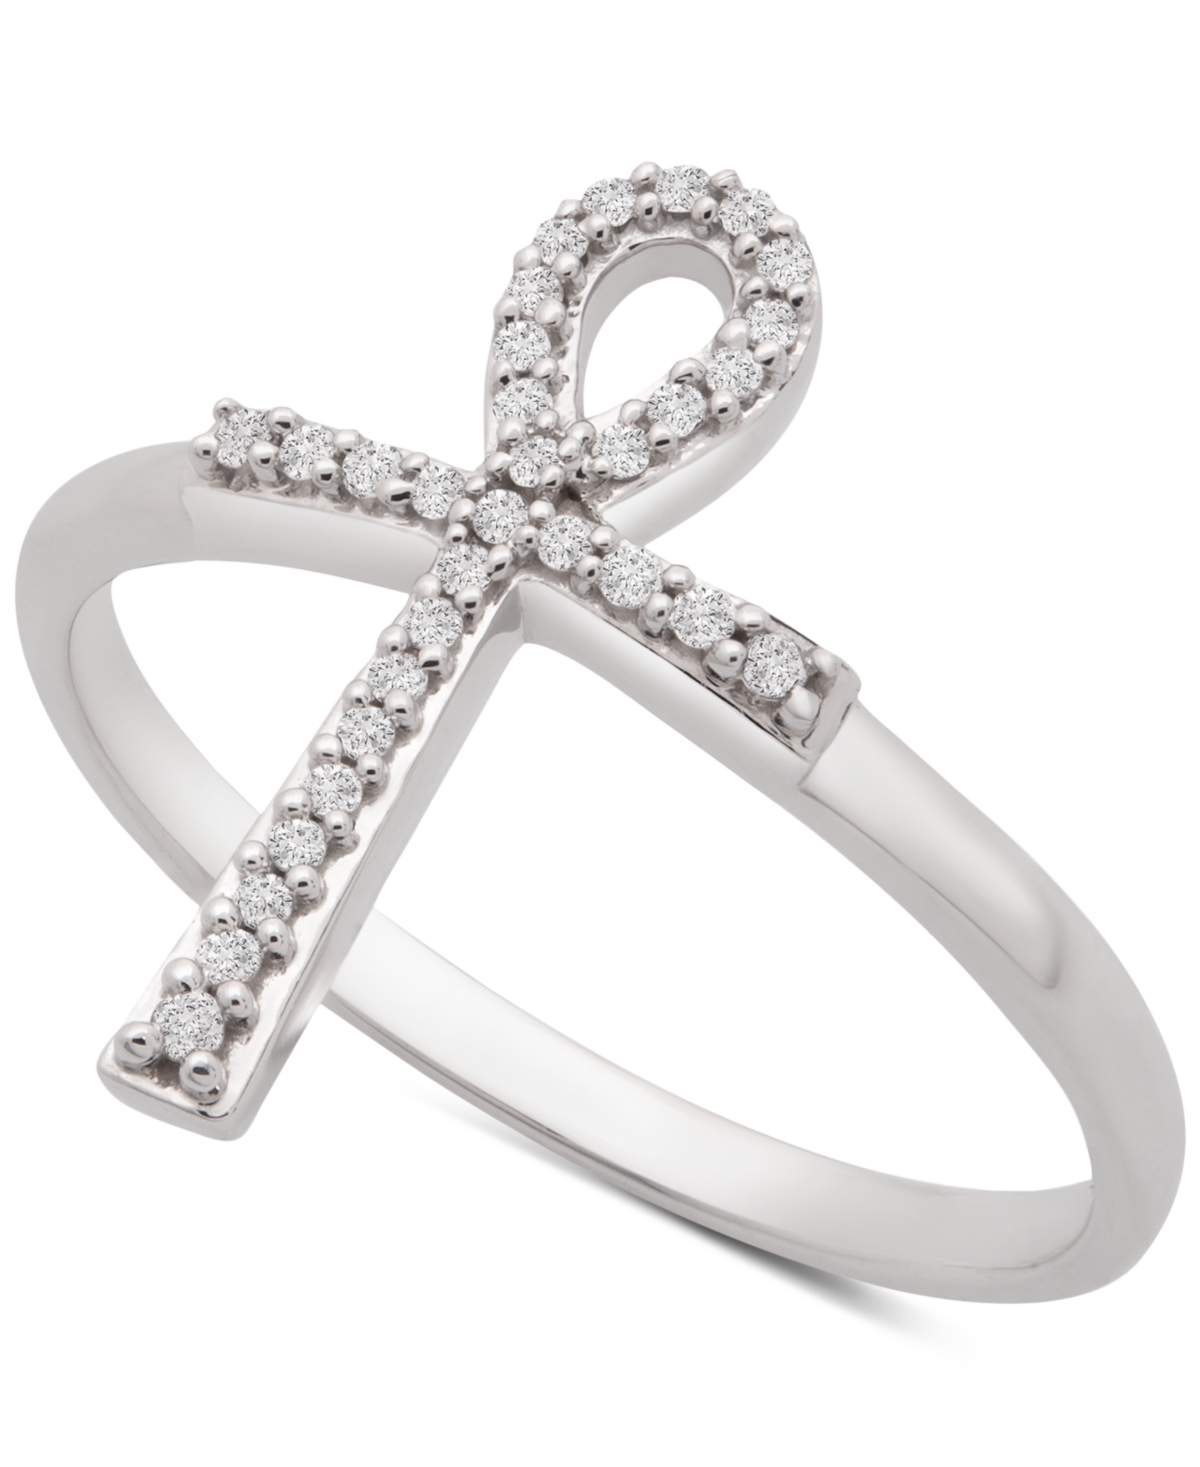 Diamond Ankh Cross Ring (1/10 ct. t.w.) in 14k White Gold, Created for Macy's - White Gold